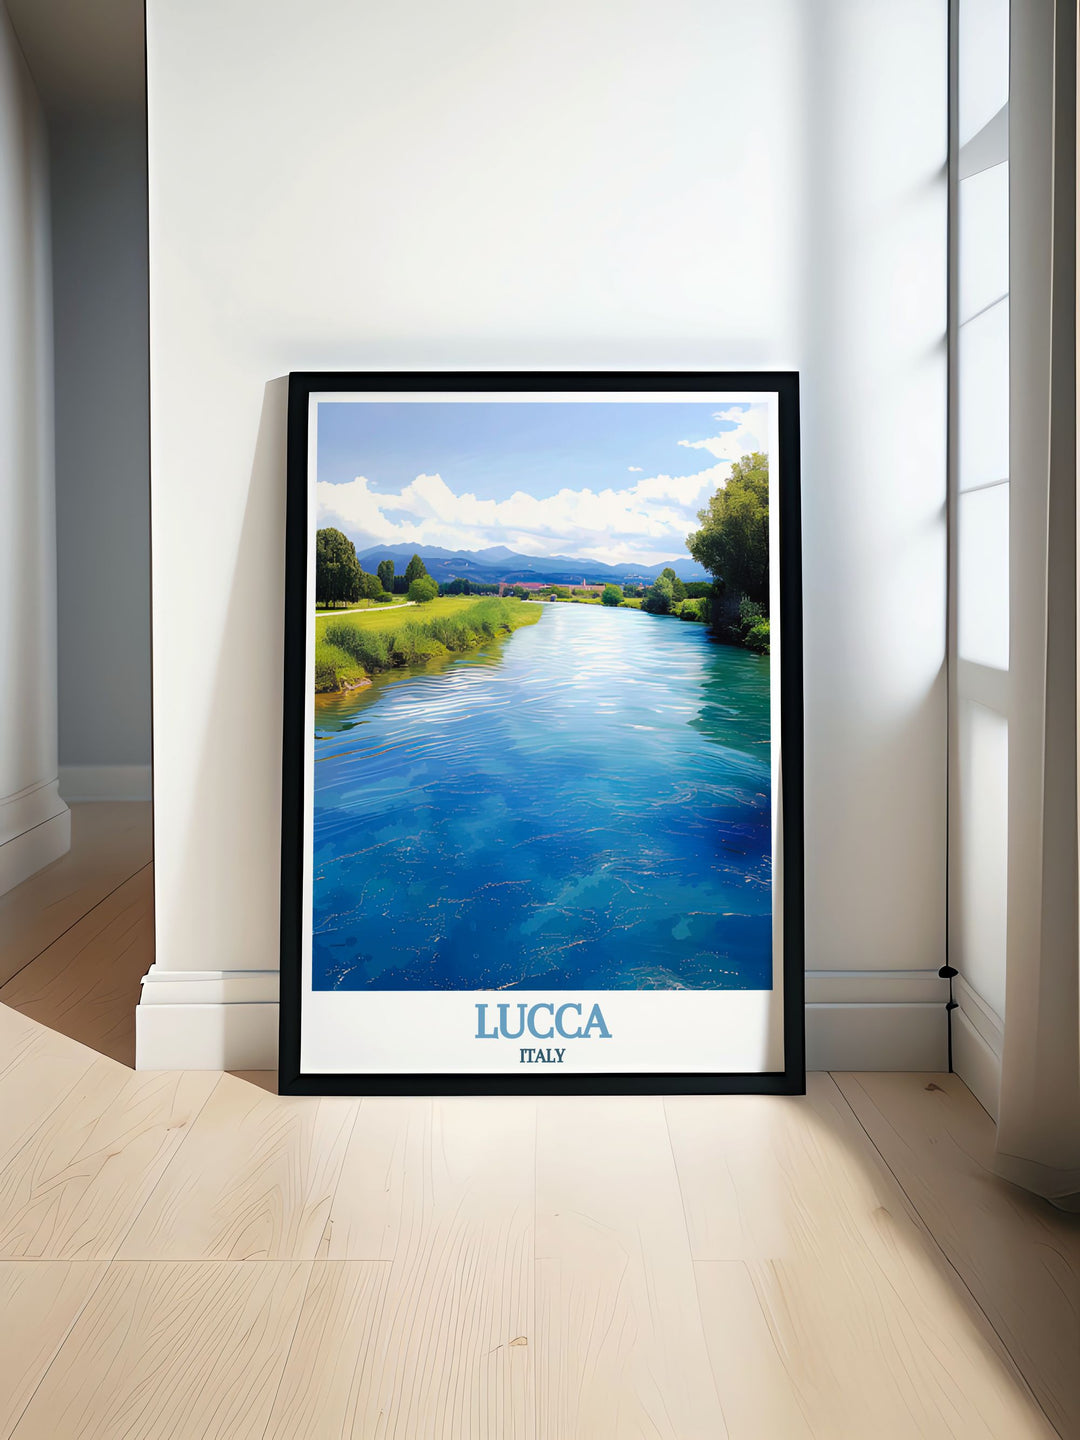 Lucca Wall Art showcasing vibrant city streets and fine line prints alongside Serchio River modern prints perfect for adding a touch of elegance to any living room or office decor